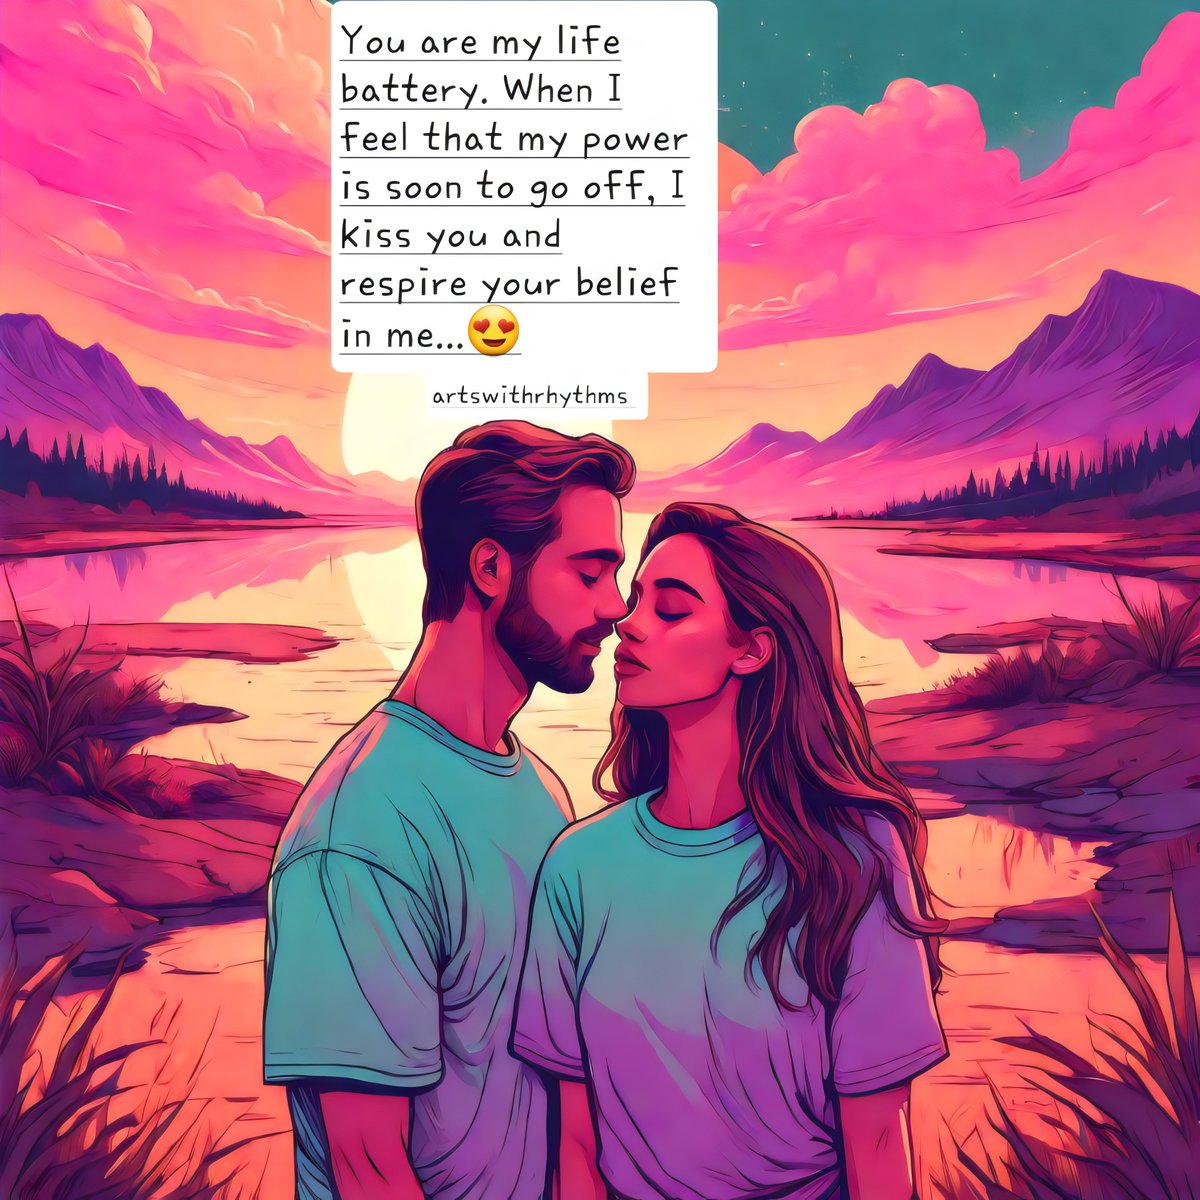 You're my life battery 😍 
#poetry #quotesaboutlove #artswithrhythms #lovequote #couplequote